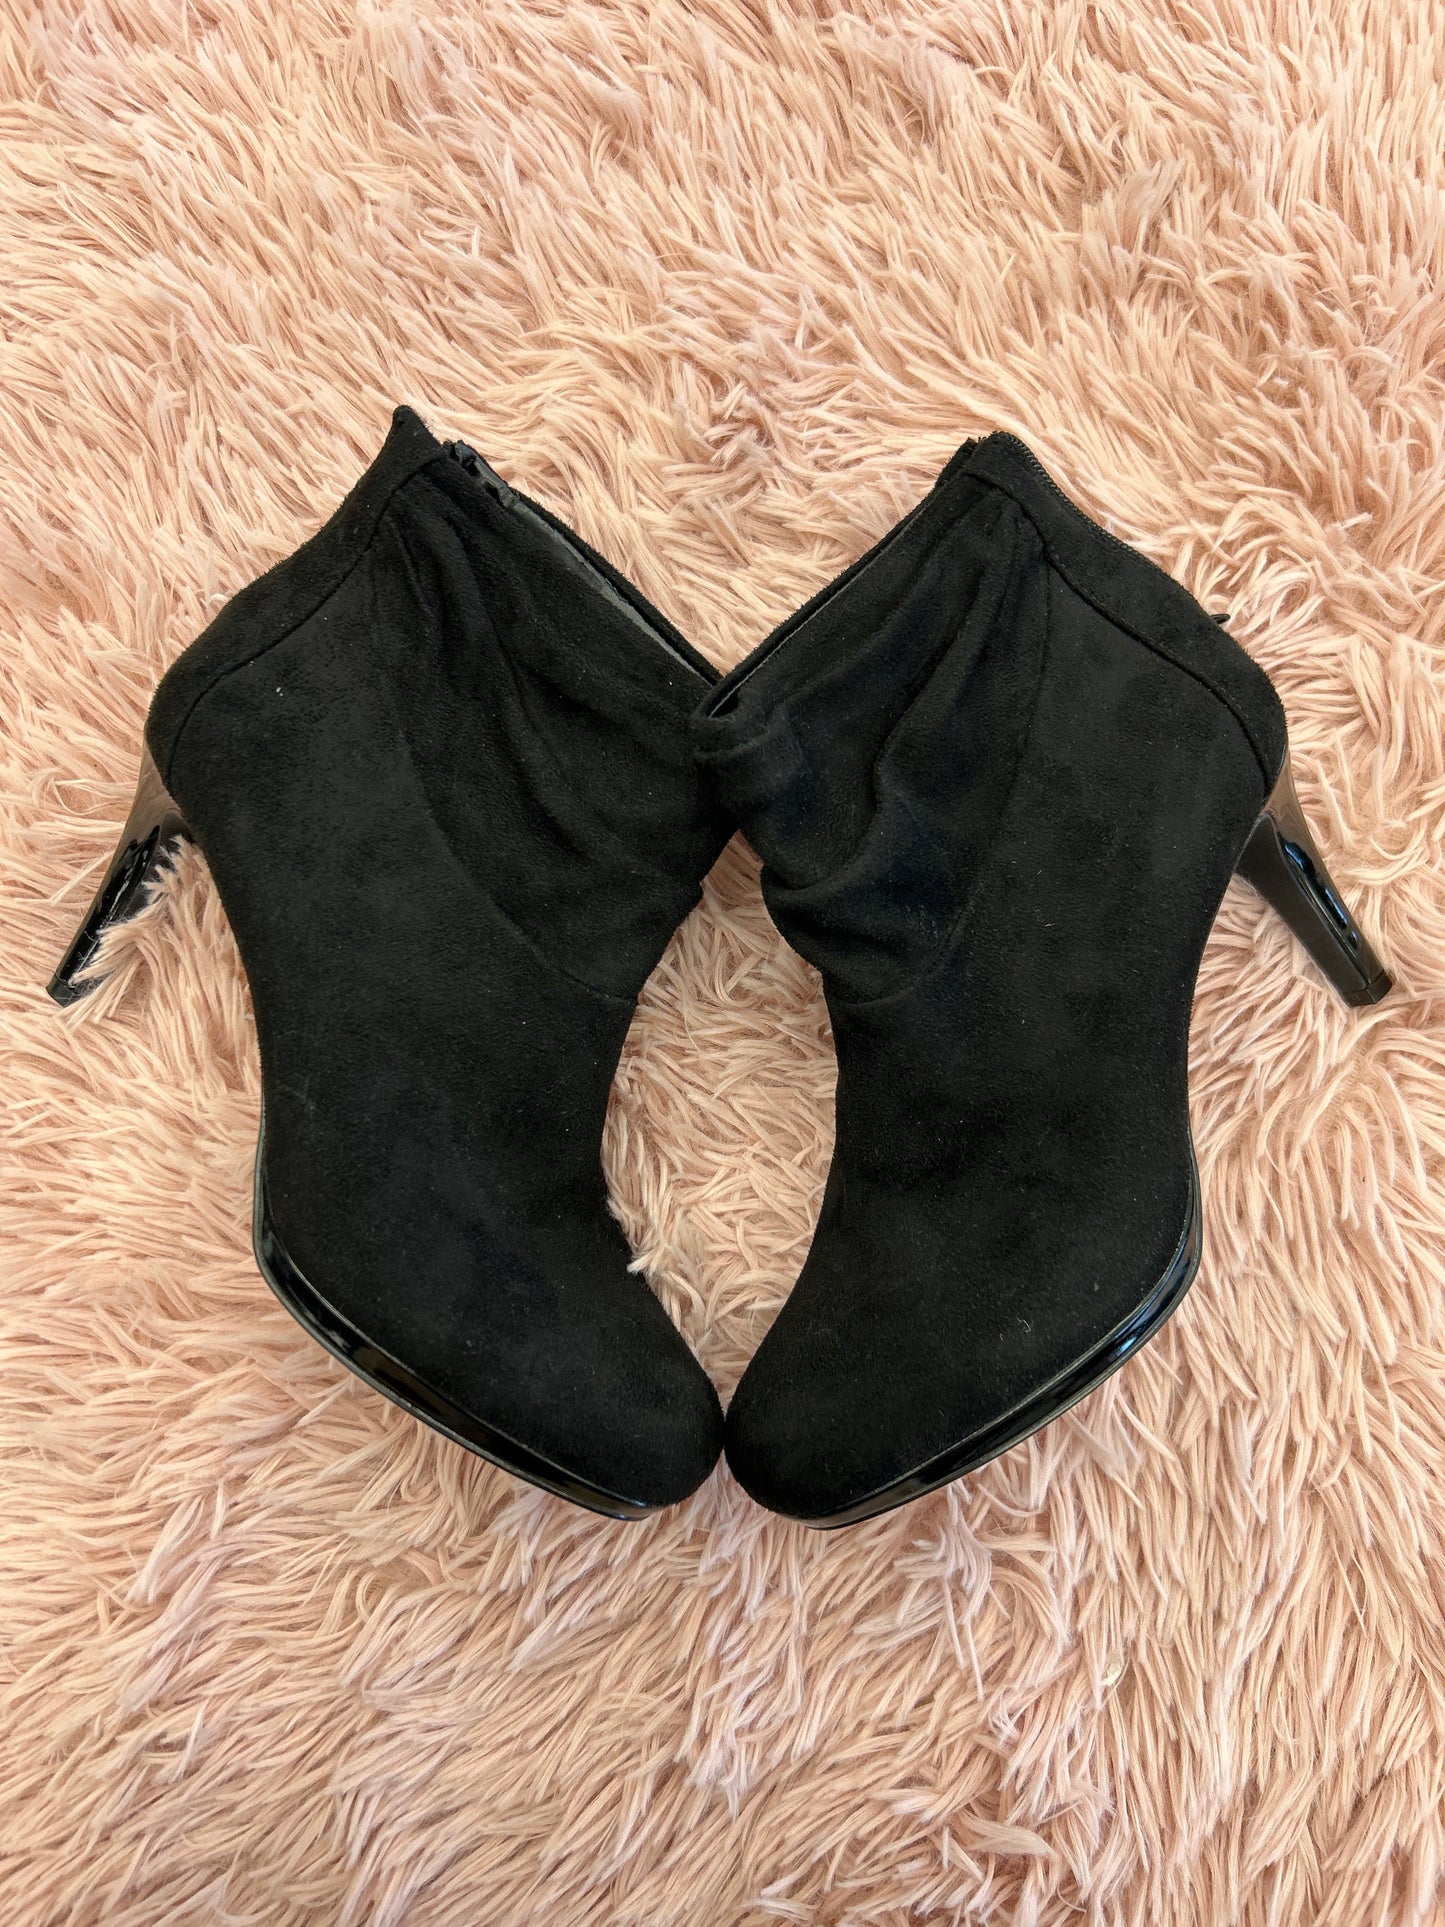 Boots Ankle Heels By Bandolino  Size: 6.5